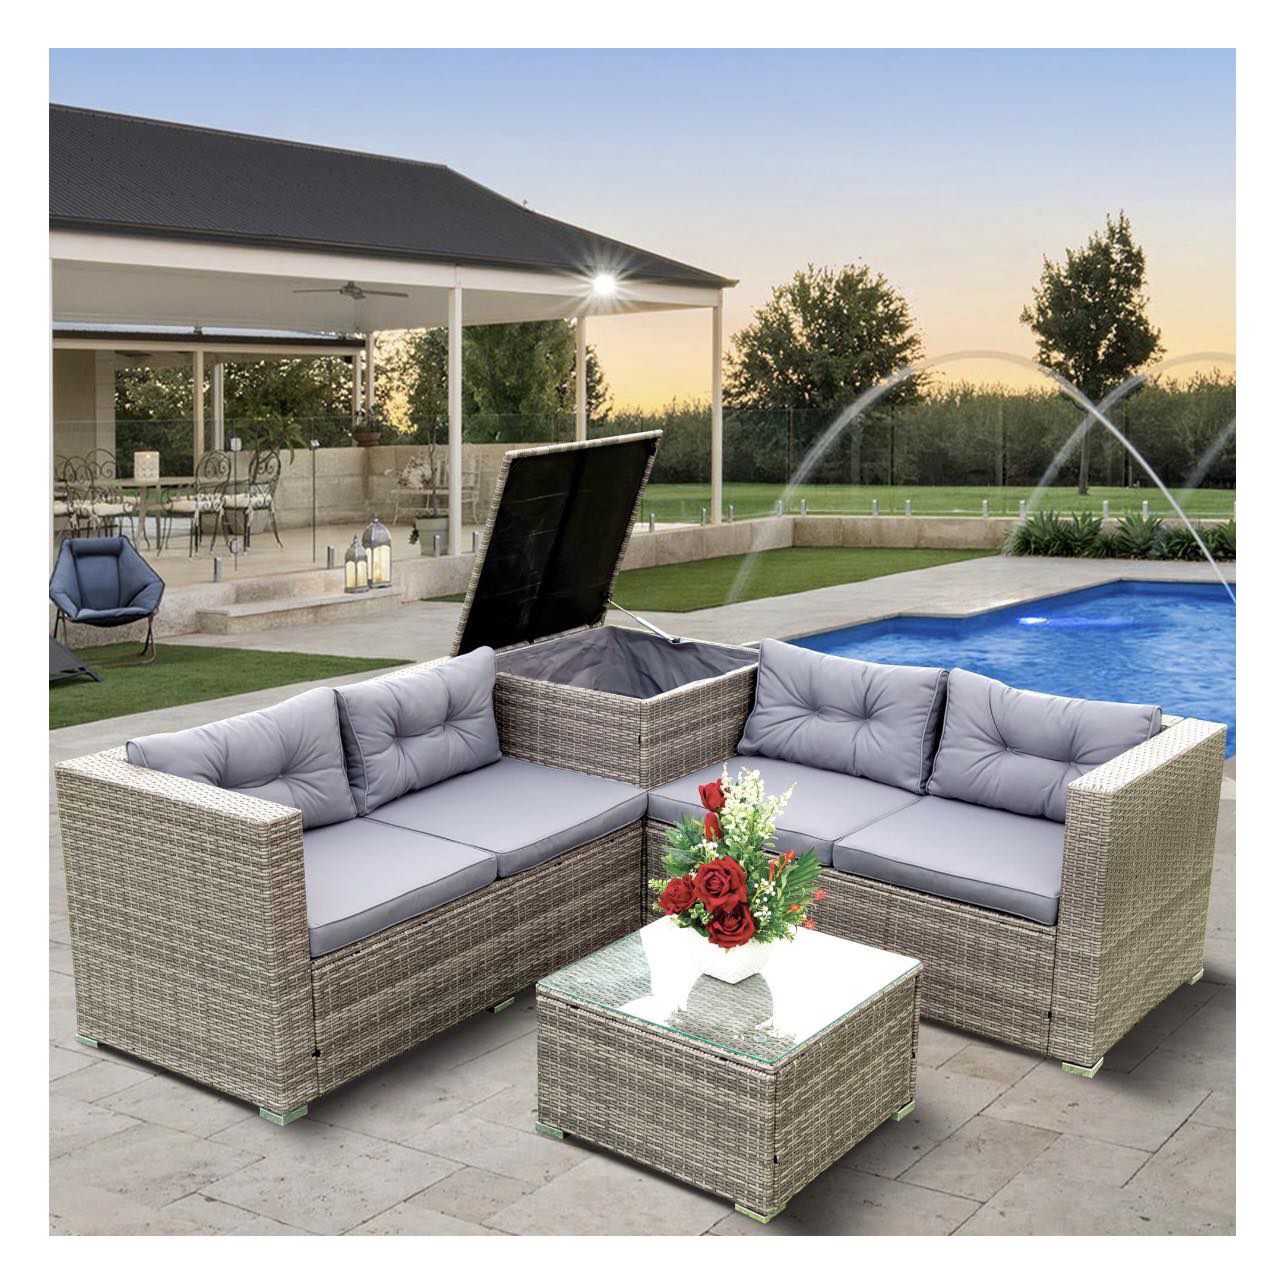 Outdoor Patio Furniture Set New in Original Packaging 7 Piece Premium Quality Set With Cushions Retailed For $1,447.33.